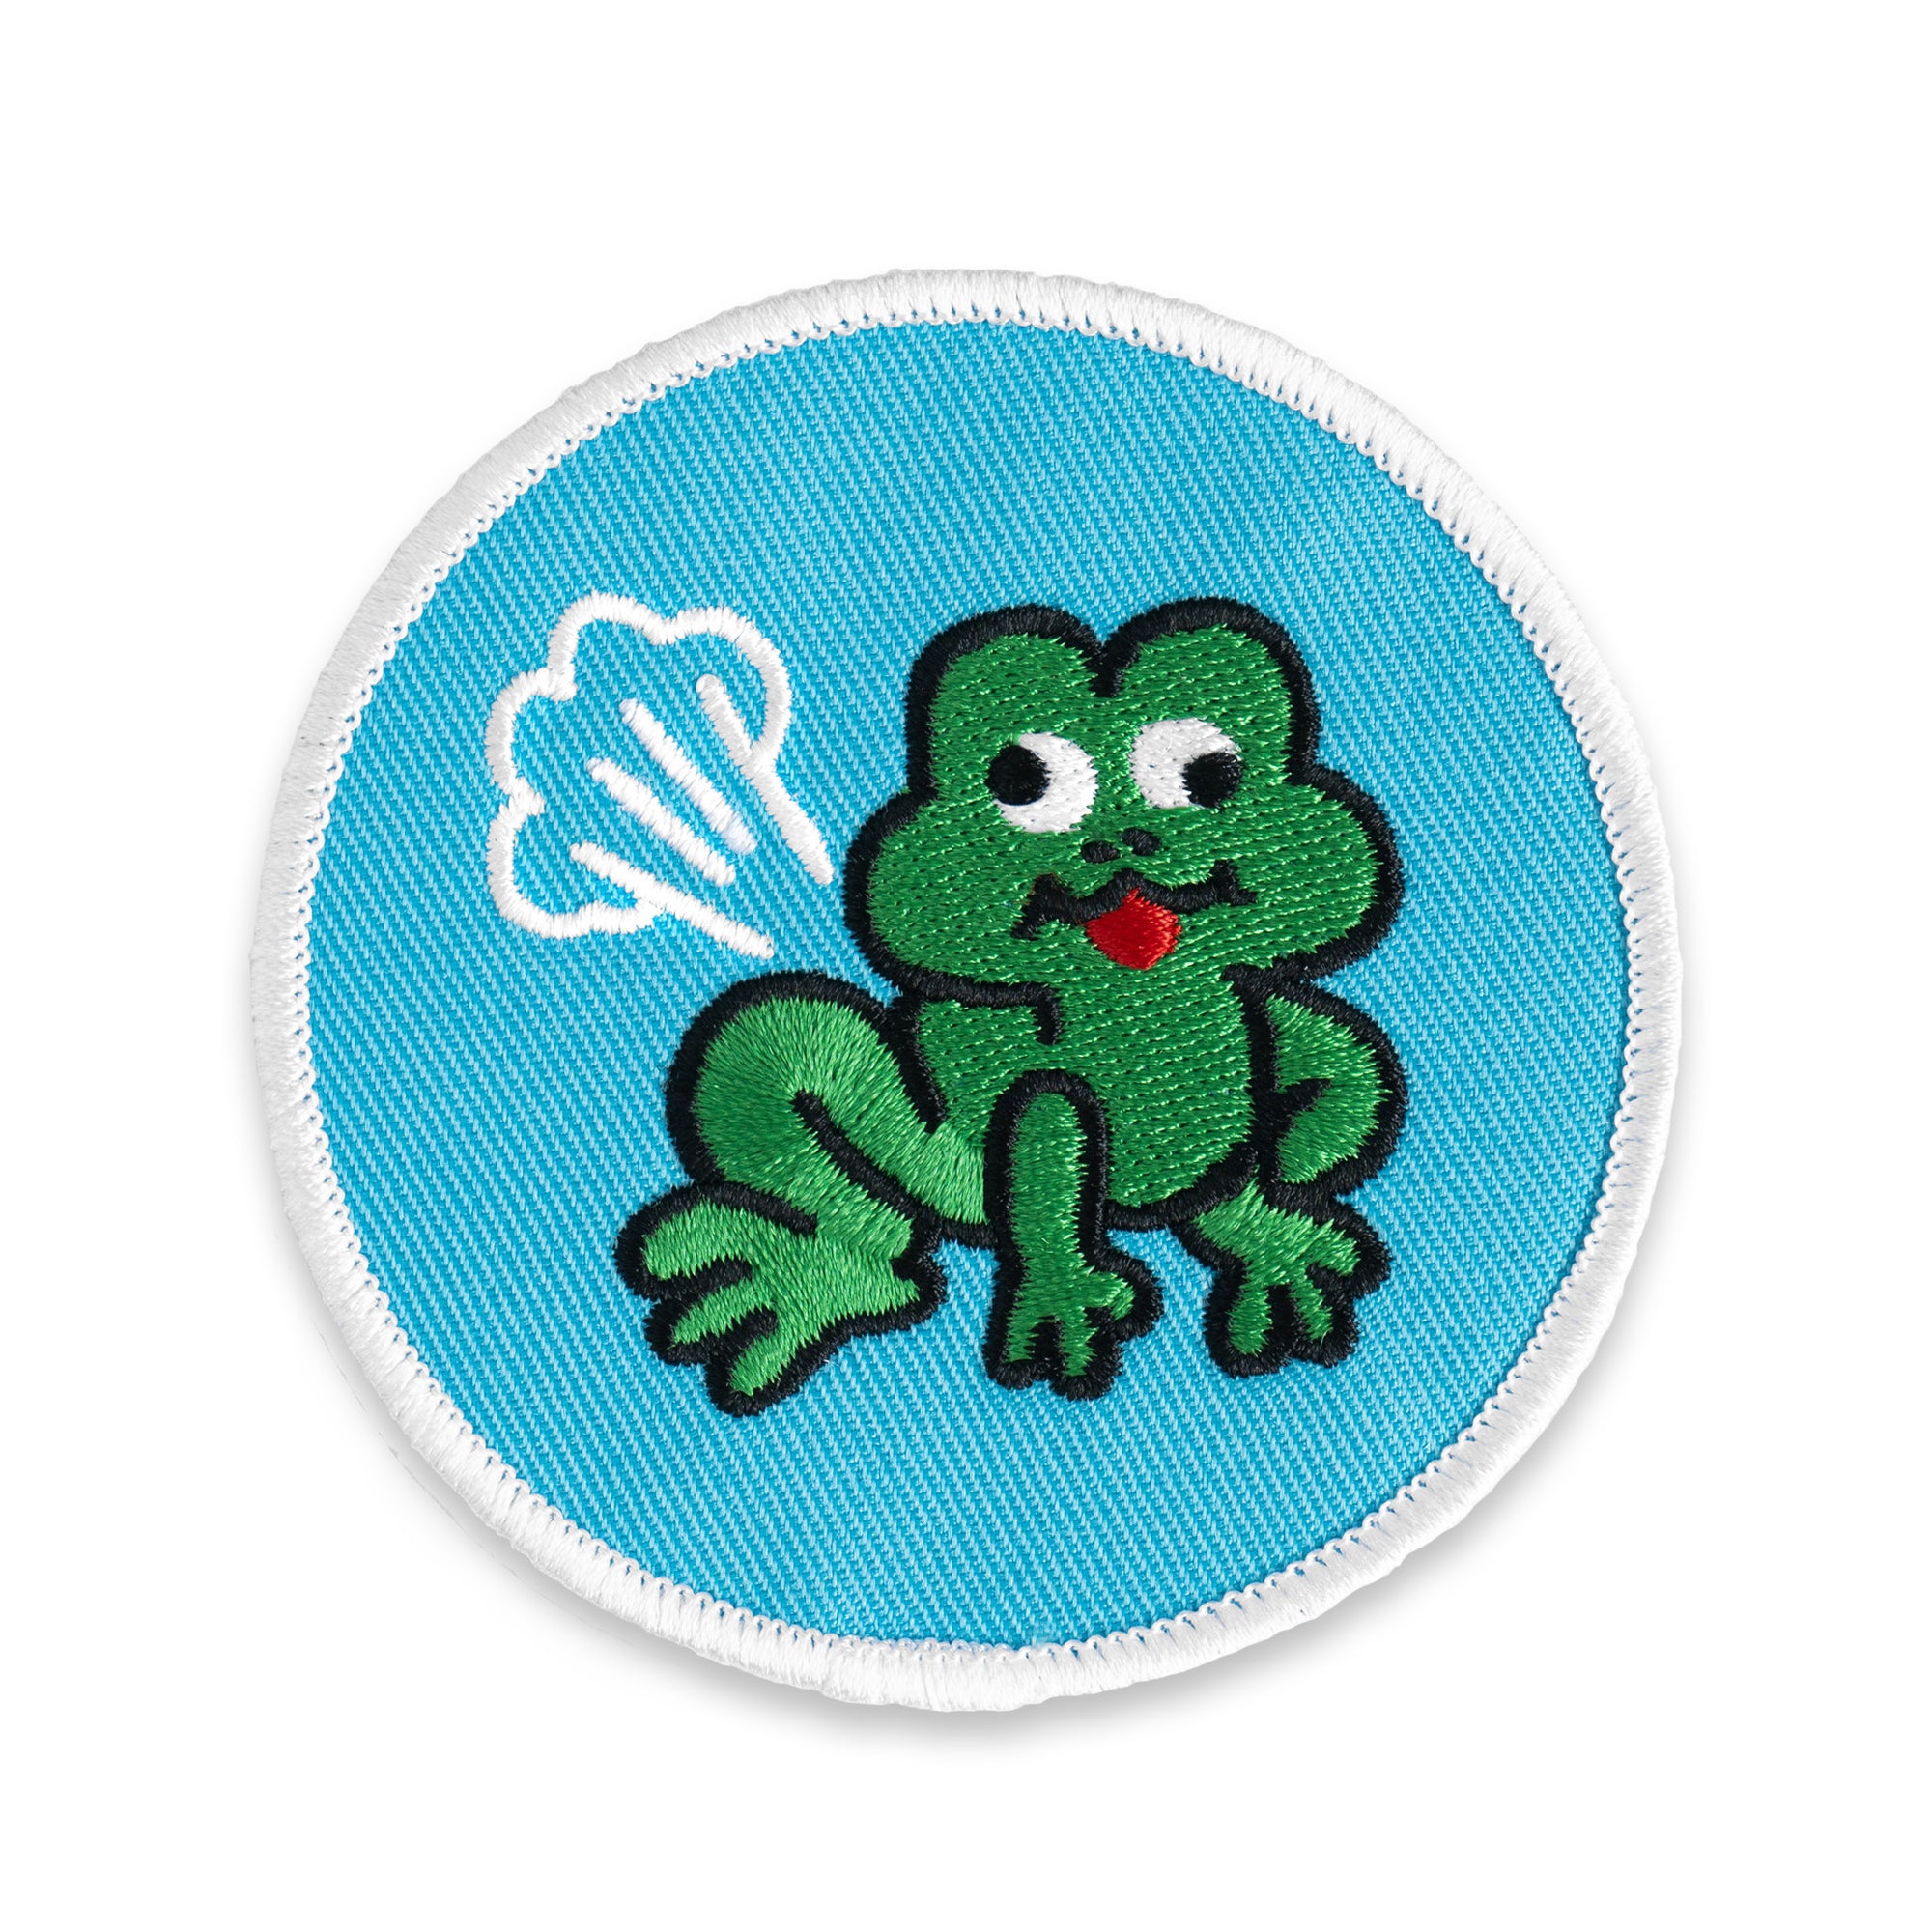 The "Farting Frog" Patch by No Fun®.  Patch is blue with white boarder.  There is a green cartoon frog in the center of the patch with a silly expression.  His tongue is out, and there is a fart cloud emanating from the frogs butt.